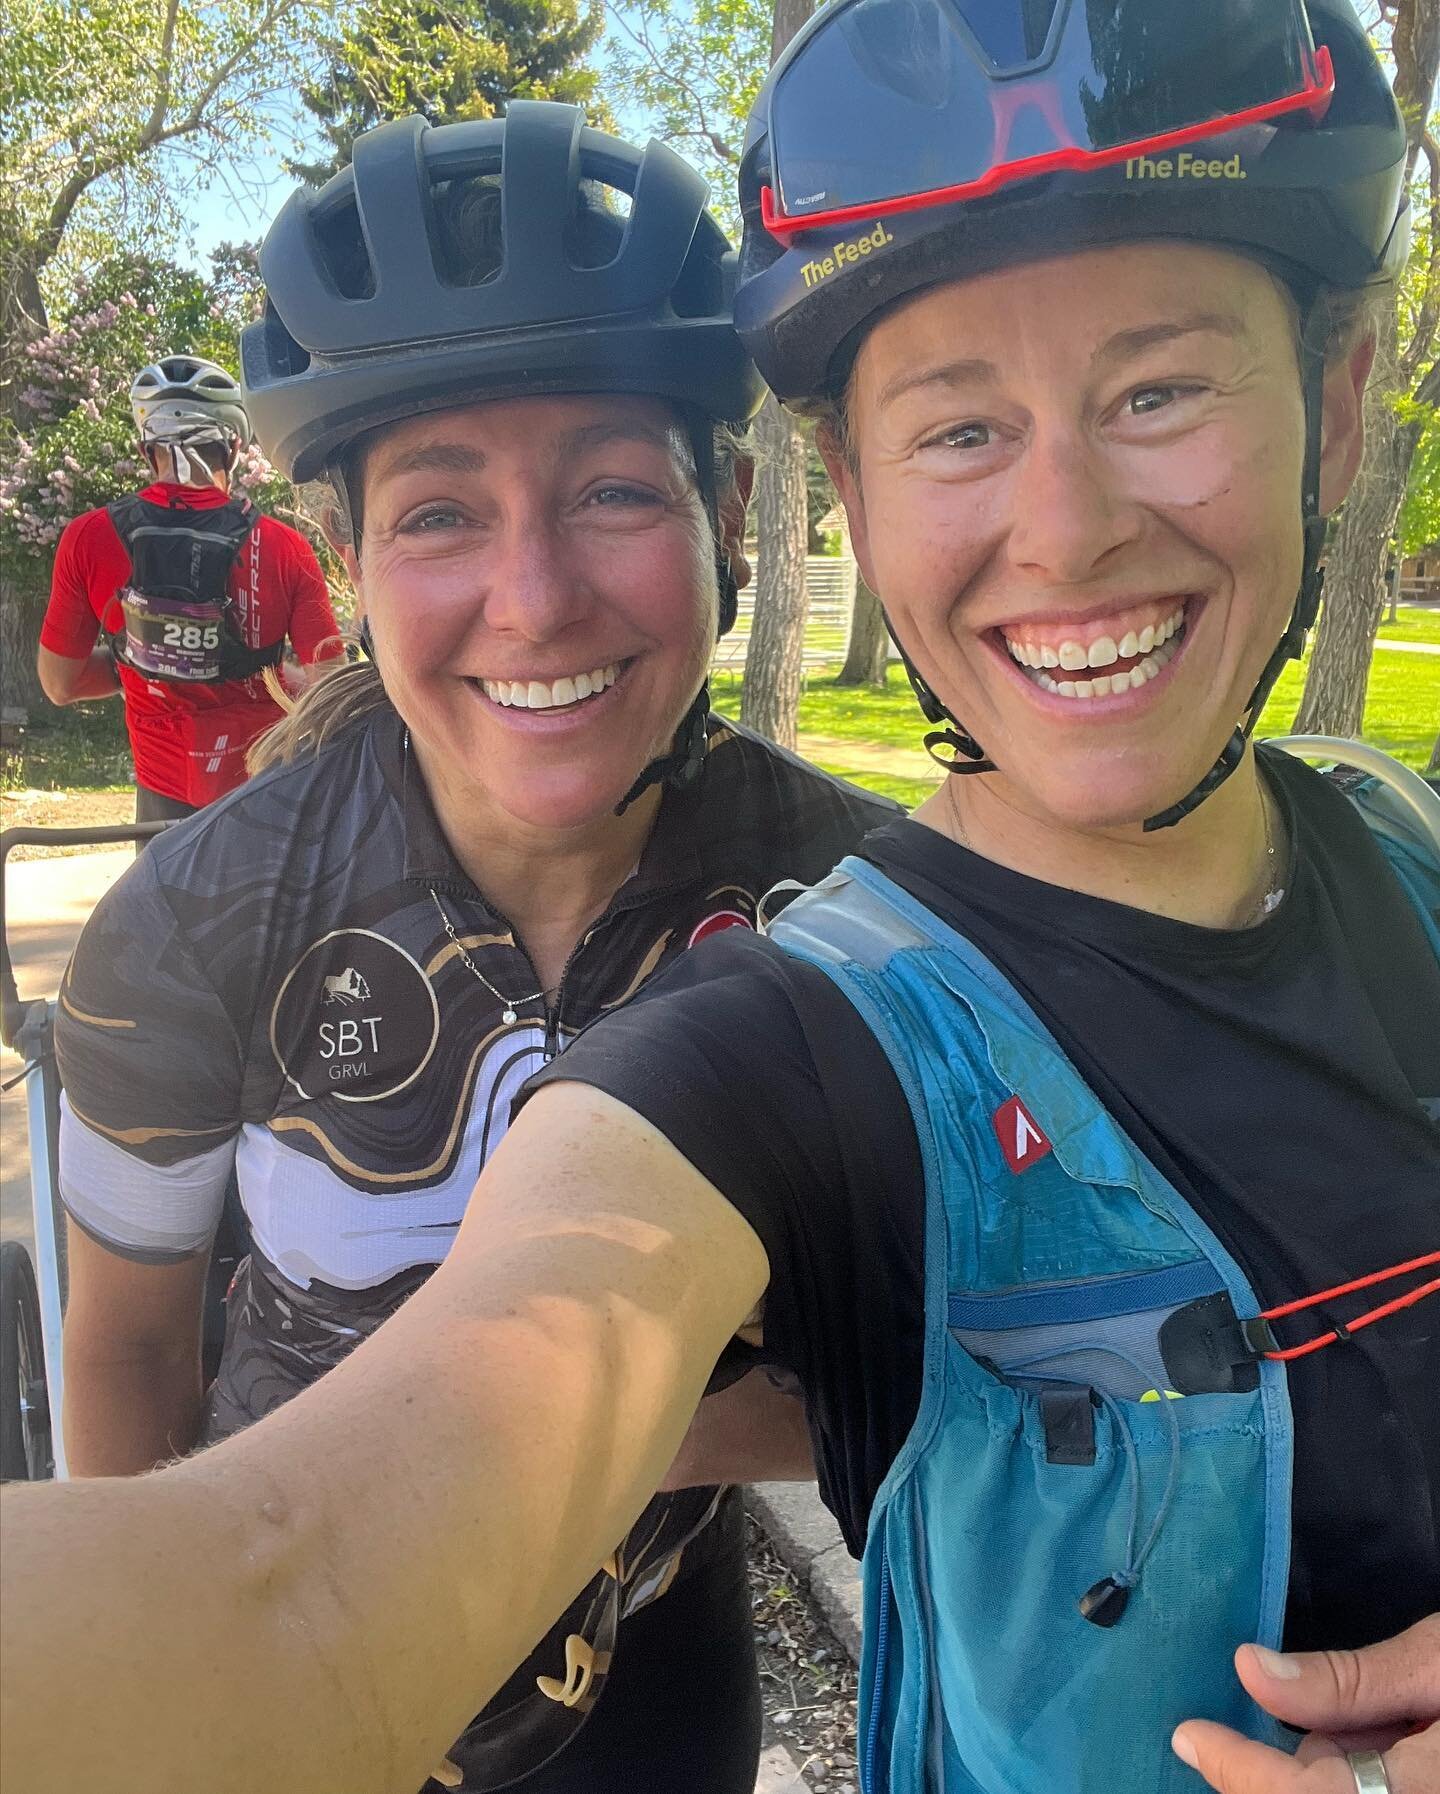 I did a last minute &lsquo;gravel&rsquo; bike race yesterday at @stetinaspaydirt - and it did not disappoint!

With a unique race format, lots of single track and a race where the focus is on the women competing I had to come. Plus, it was the perfec